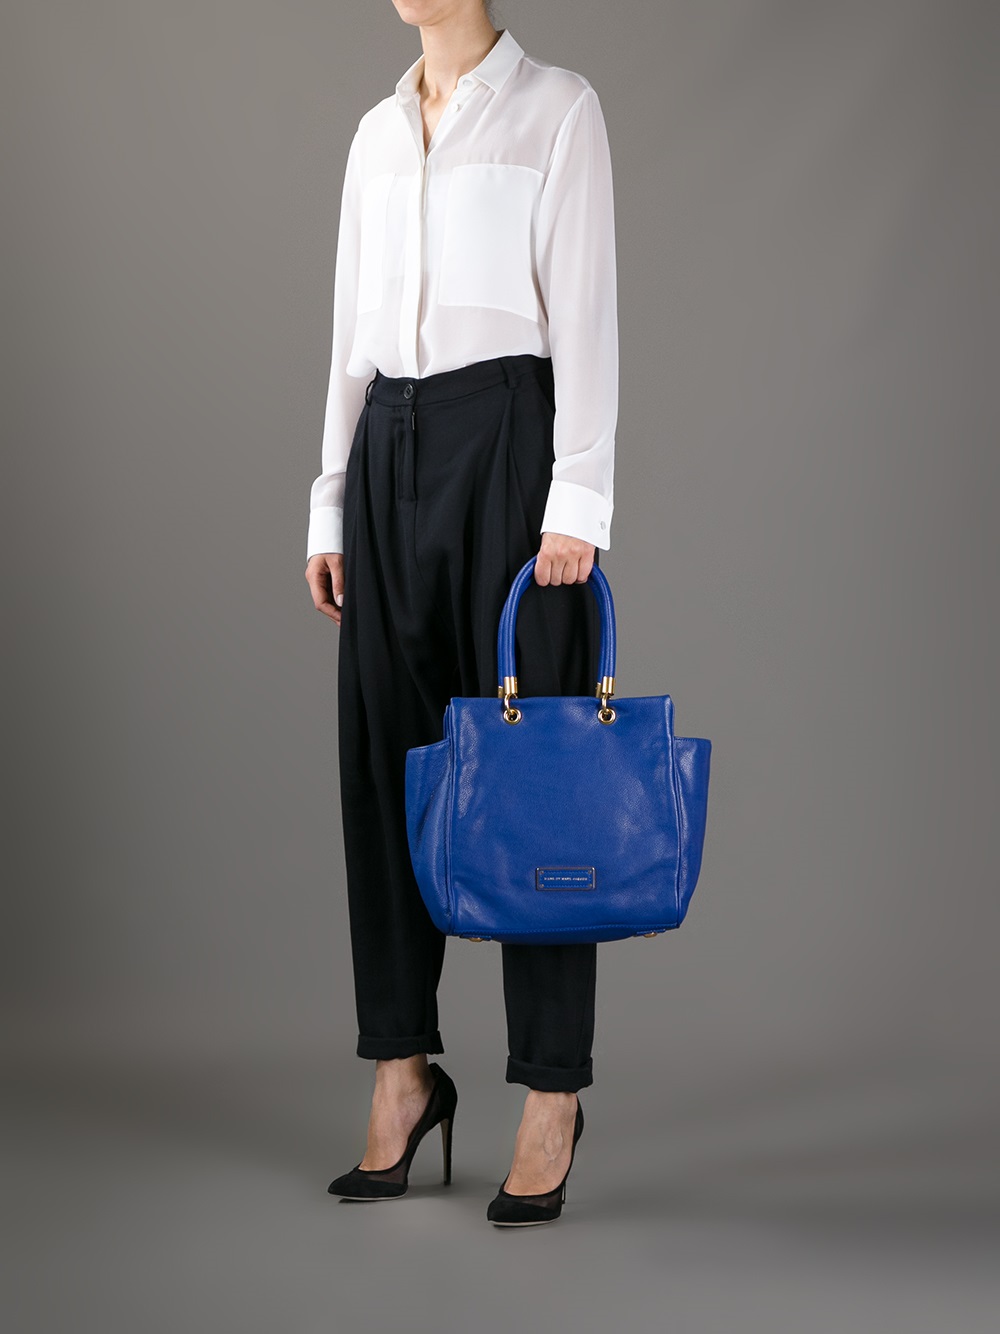 Marc By Marc Jacobs Too Hot To Handle Bentley Tote in Blue - Lyst